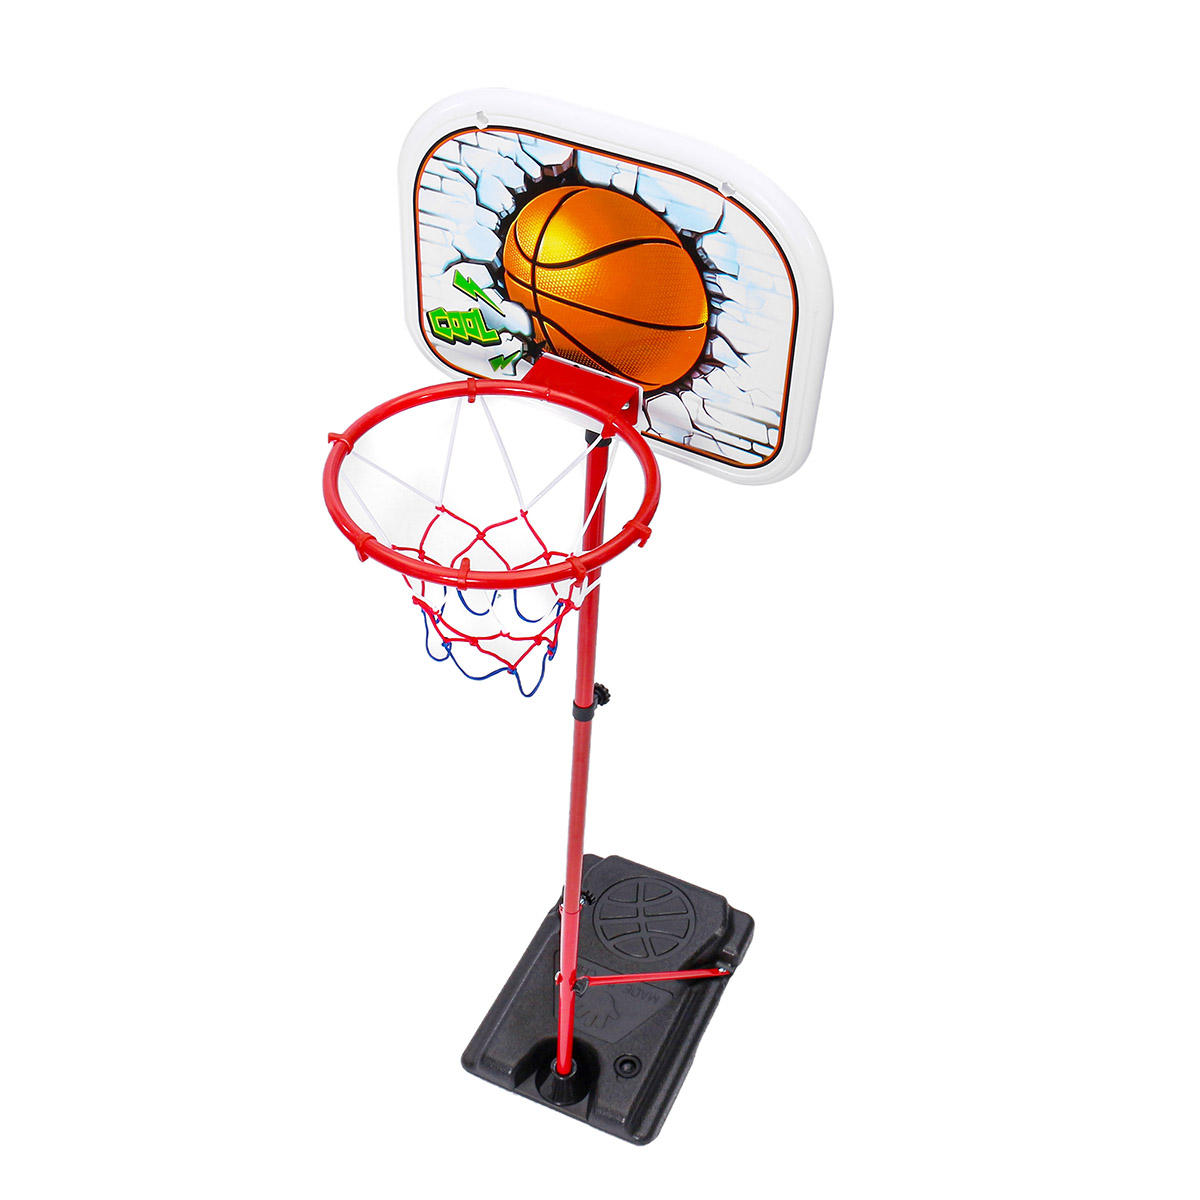 Liftable Tire Iron Frame Basketball Stand Children's Outdoor Indoor Sports Shooting Frame Toys